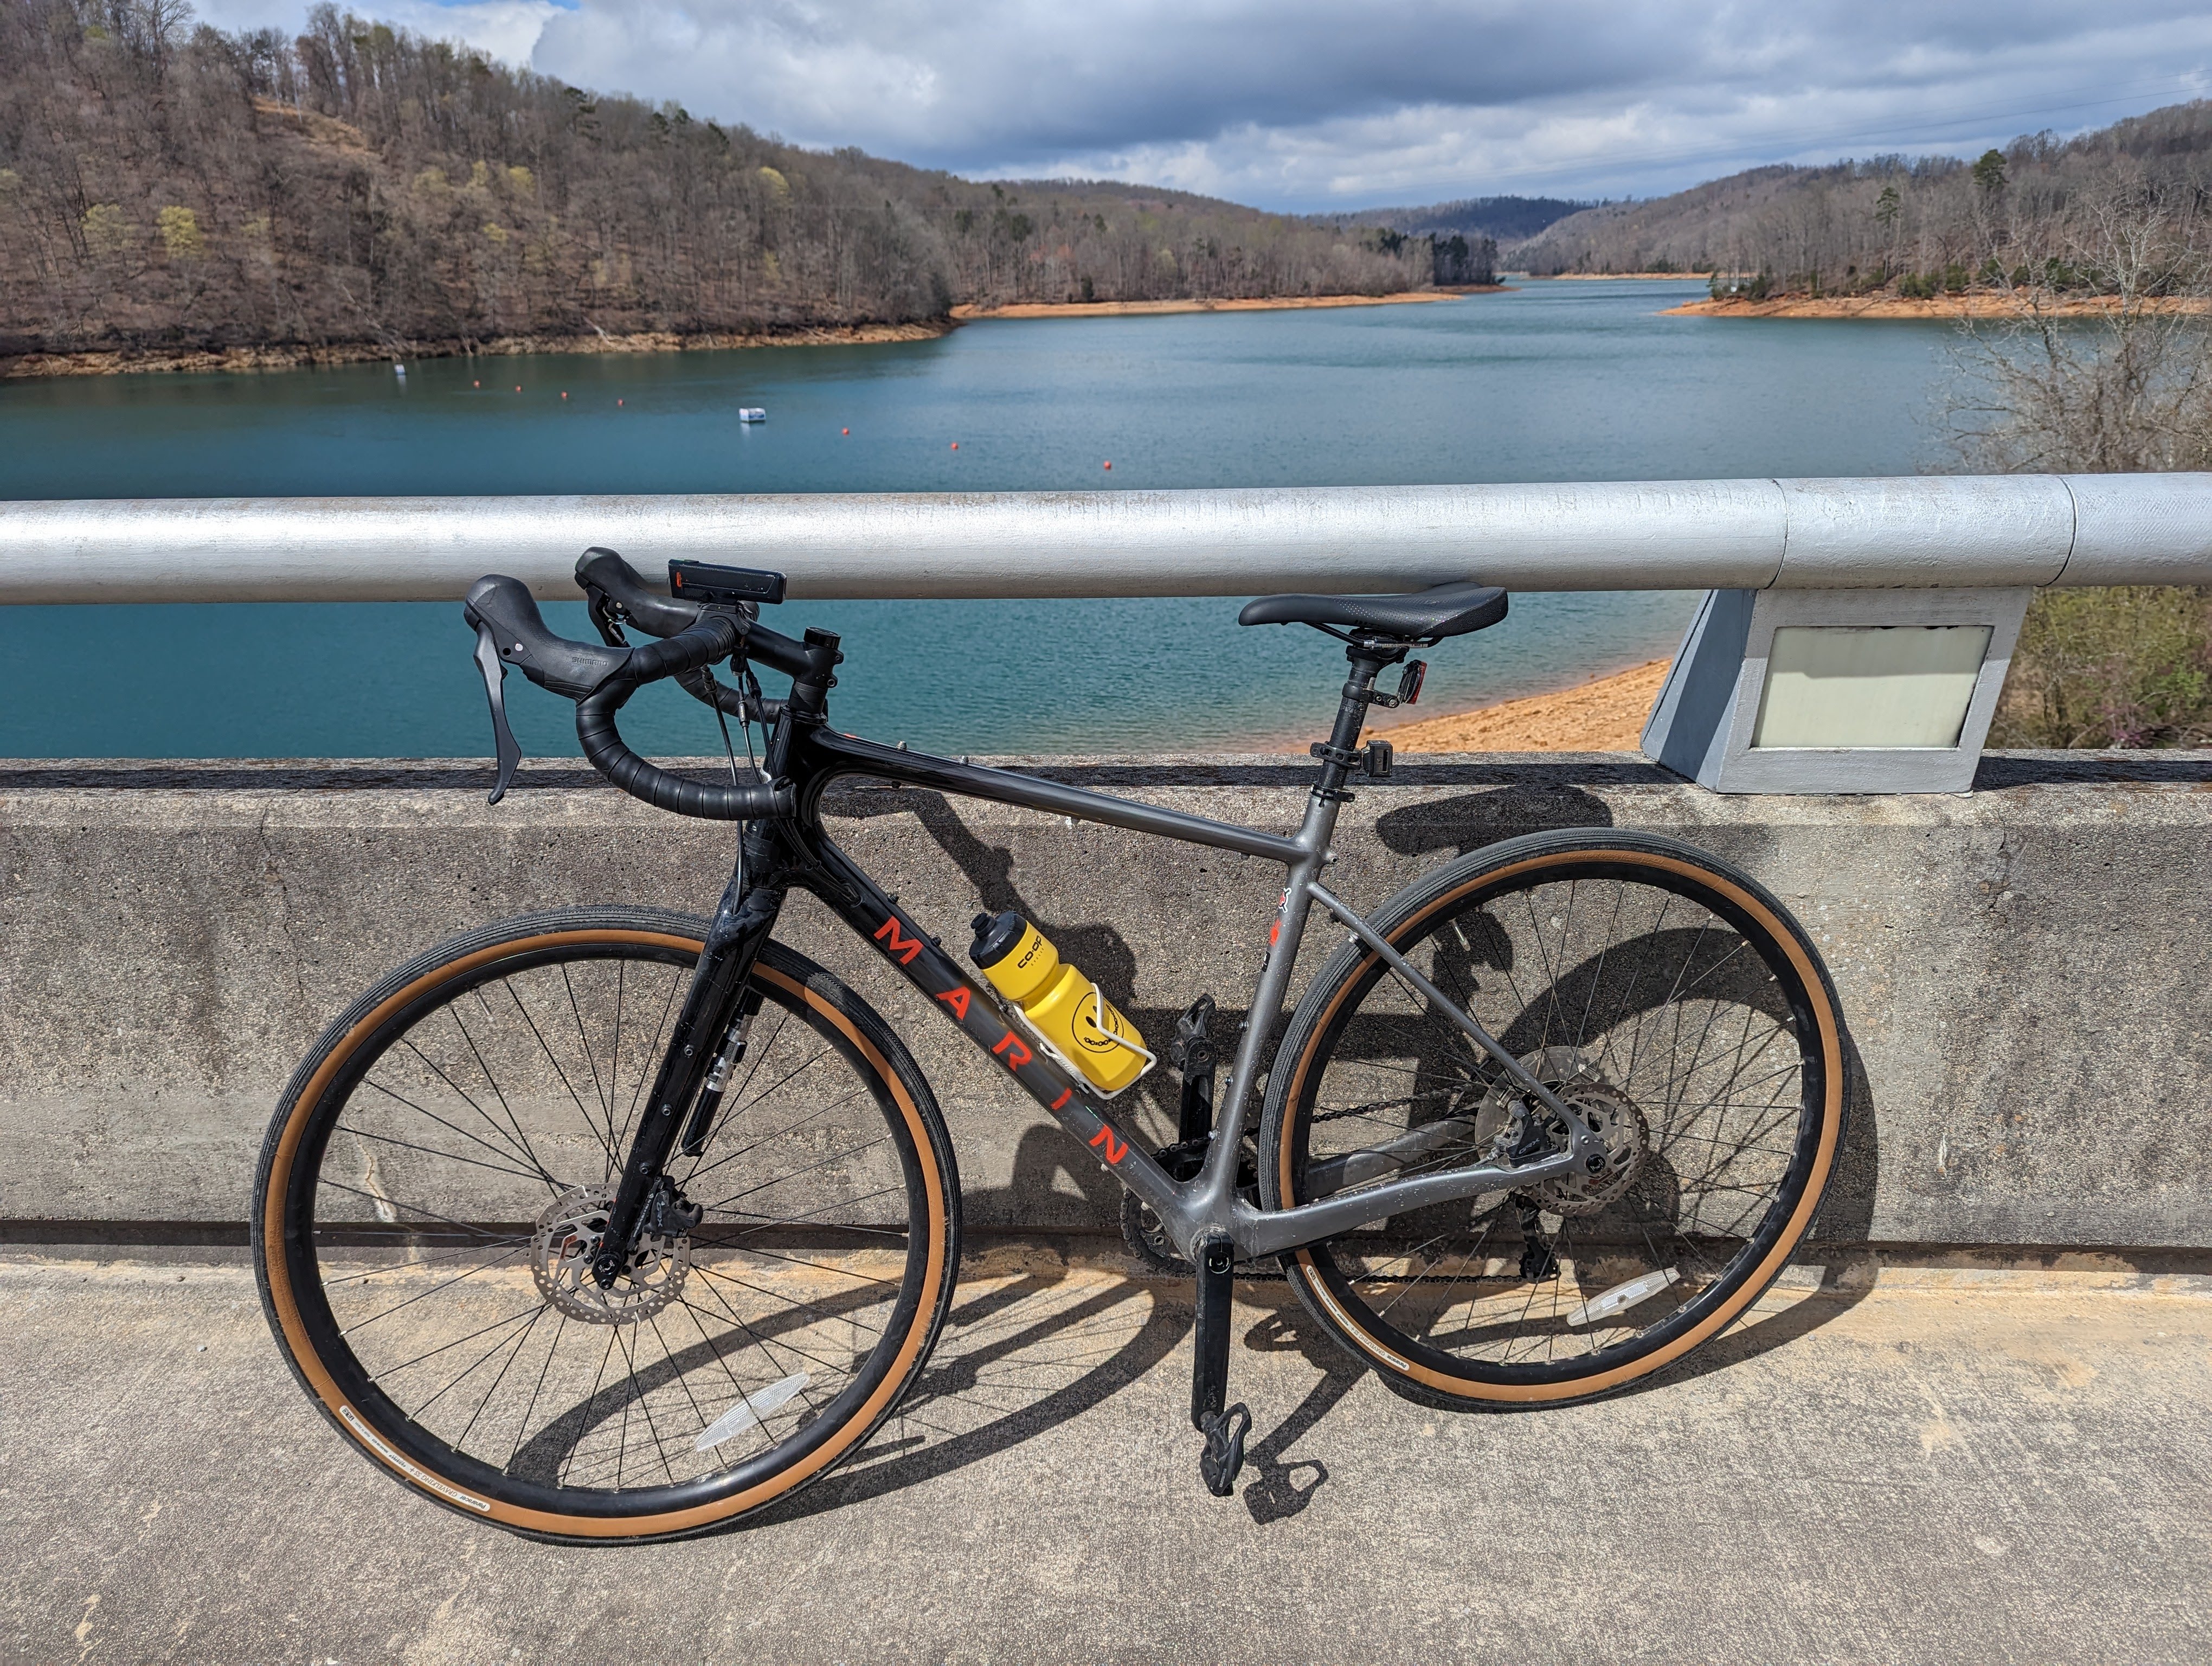 gray and black gravel bike leaning against a concrete guard rail overlooking Norris Lake in winter